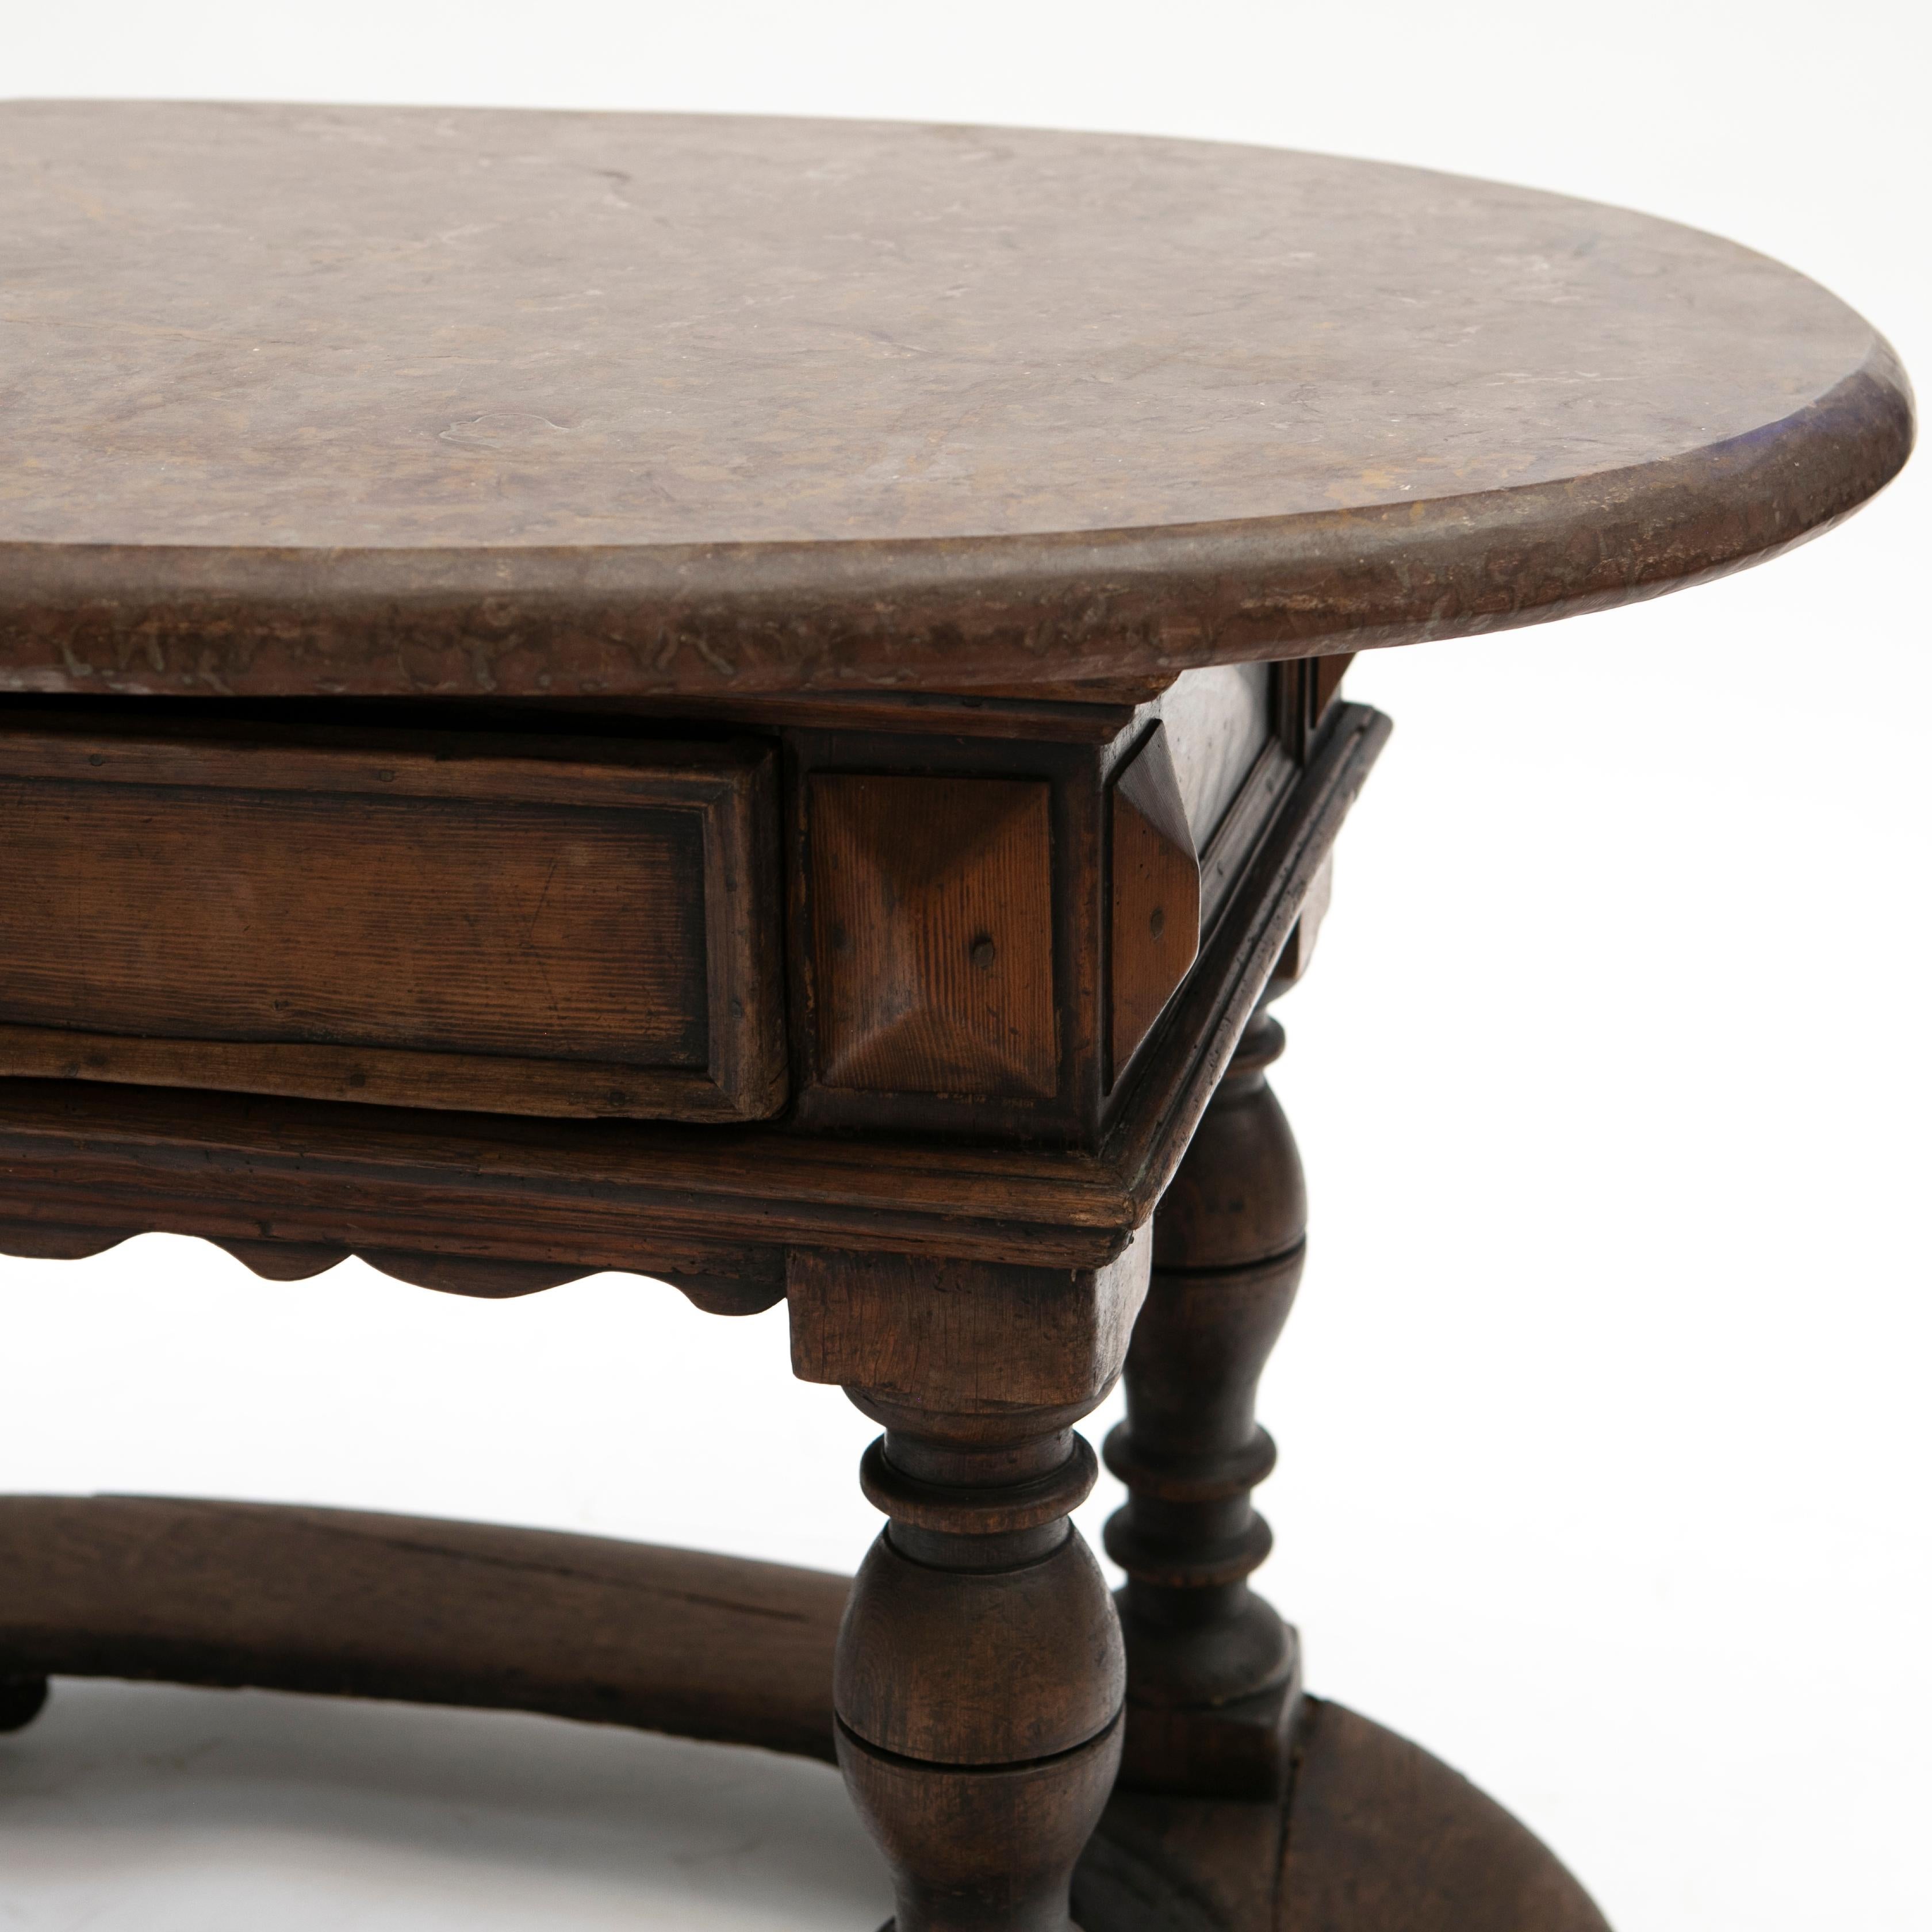 Swedish Baroque Table Oak with Fossil Limestone Top In Good Condition For Sale In Kastrup, DK